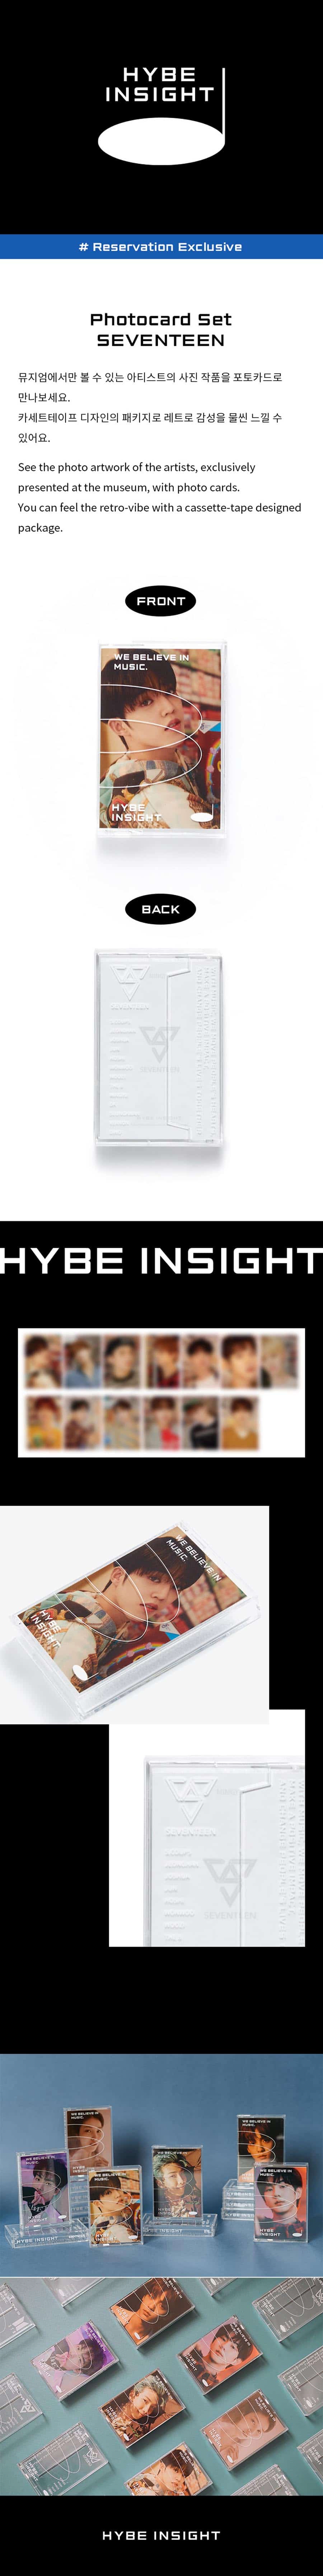 seventeen-hybe-insight-official-photocard-set-wholesale